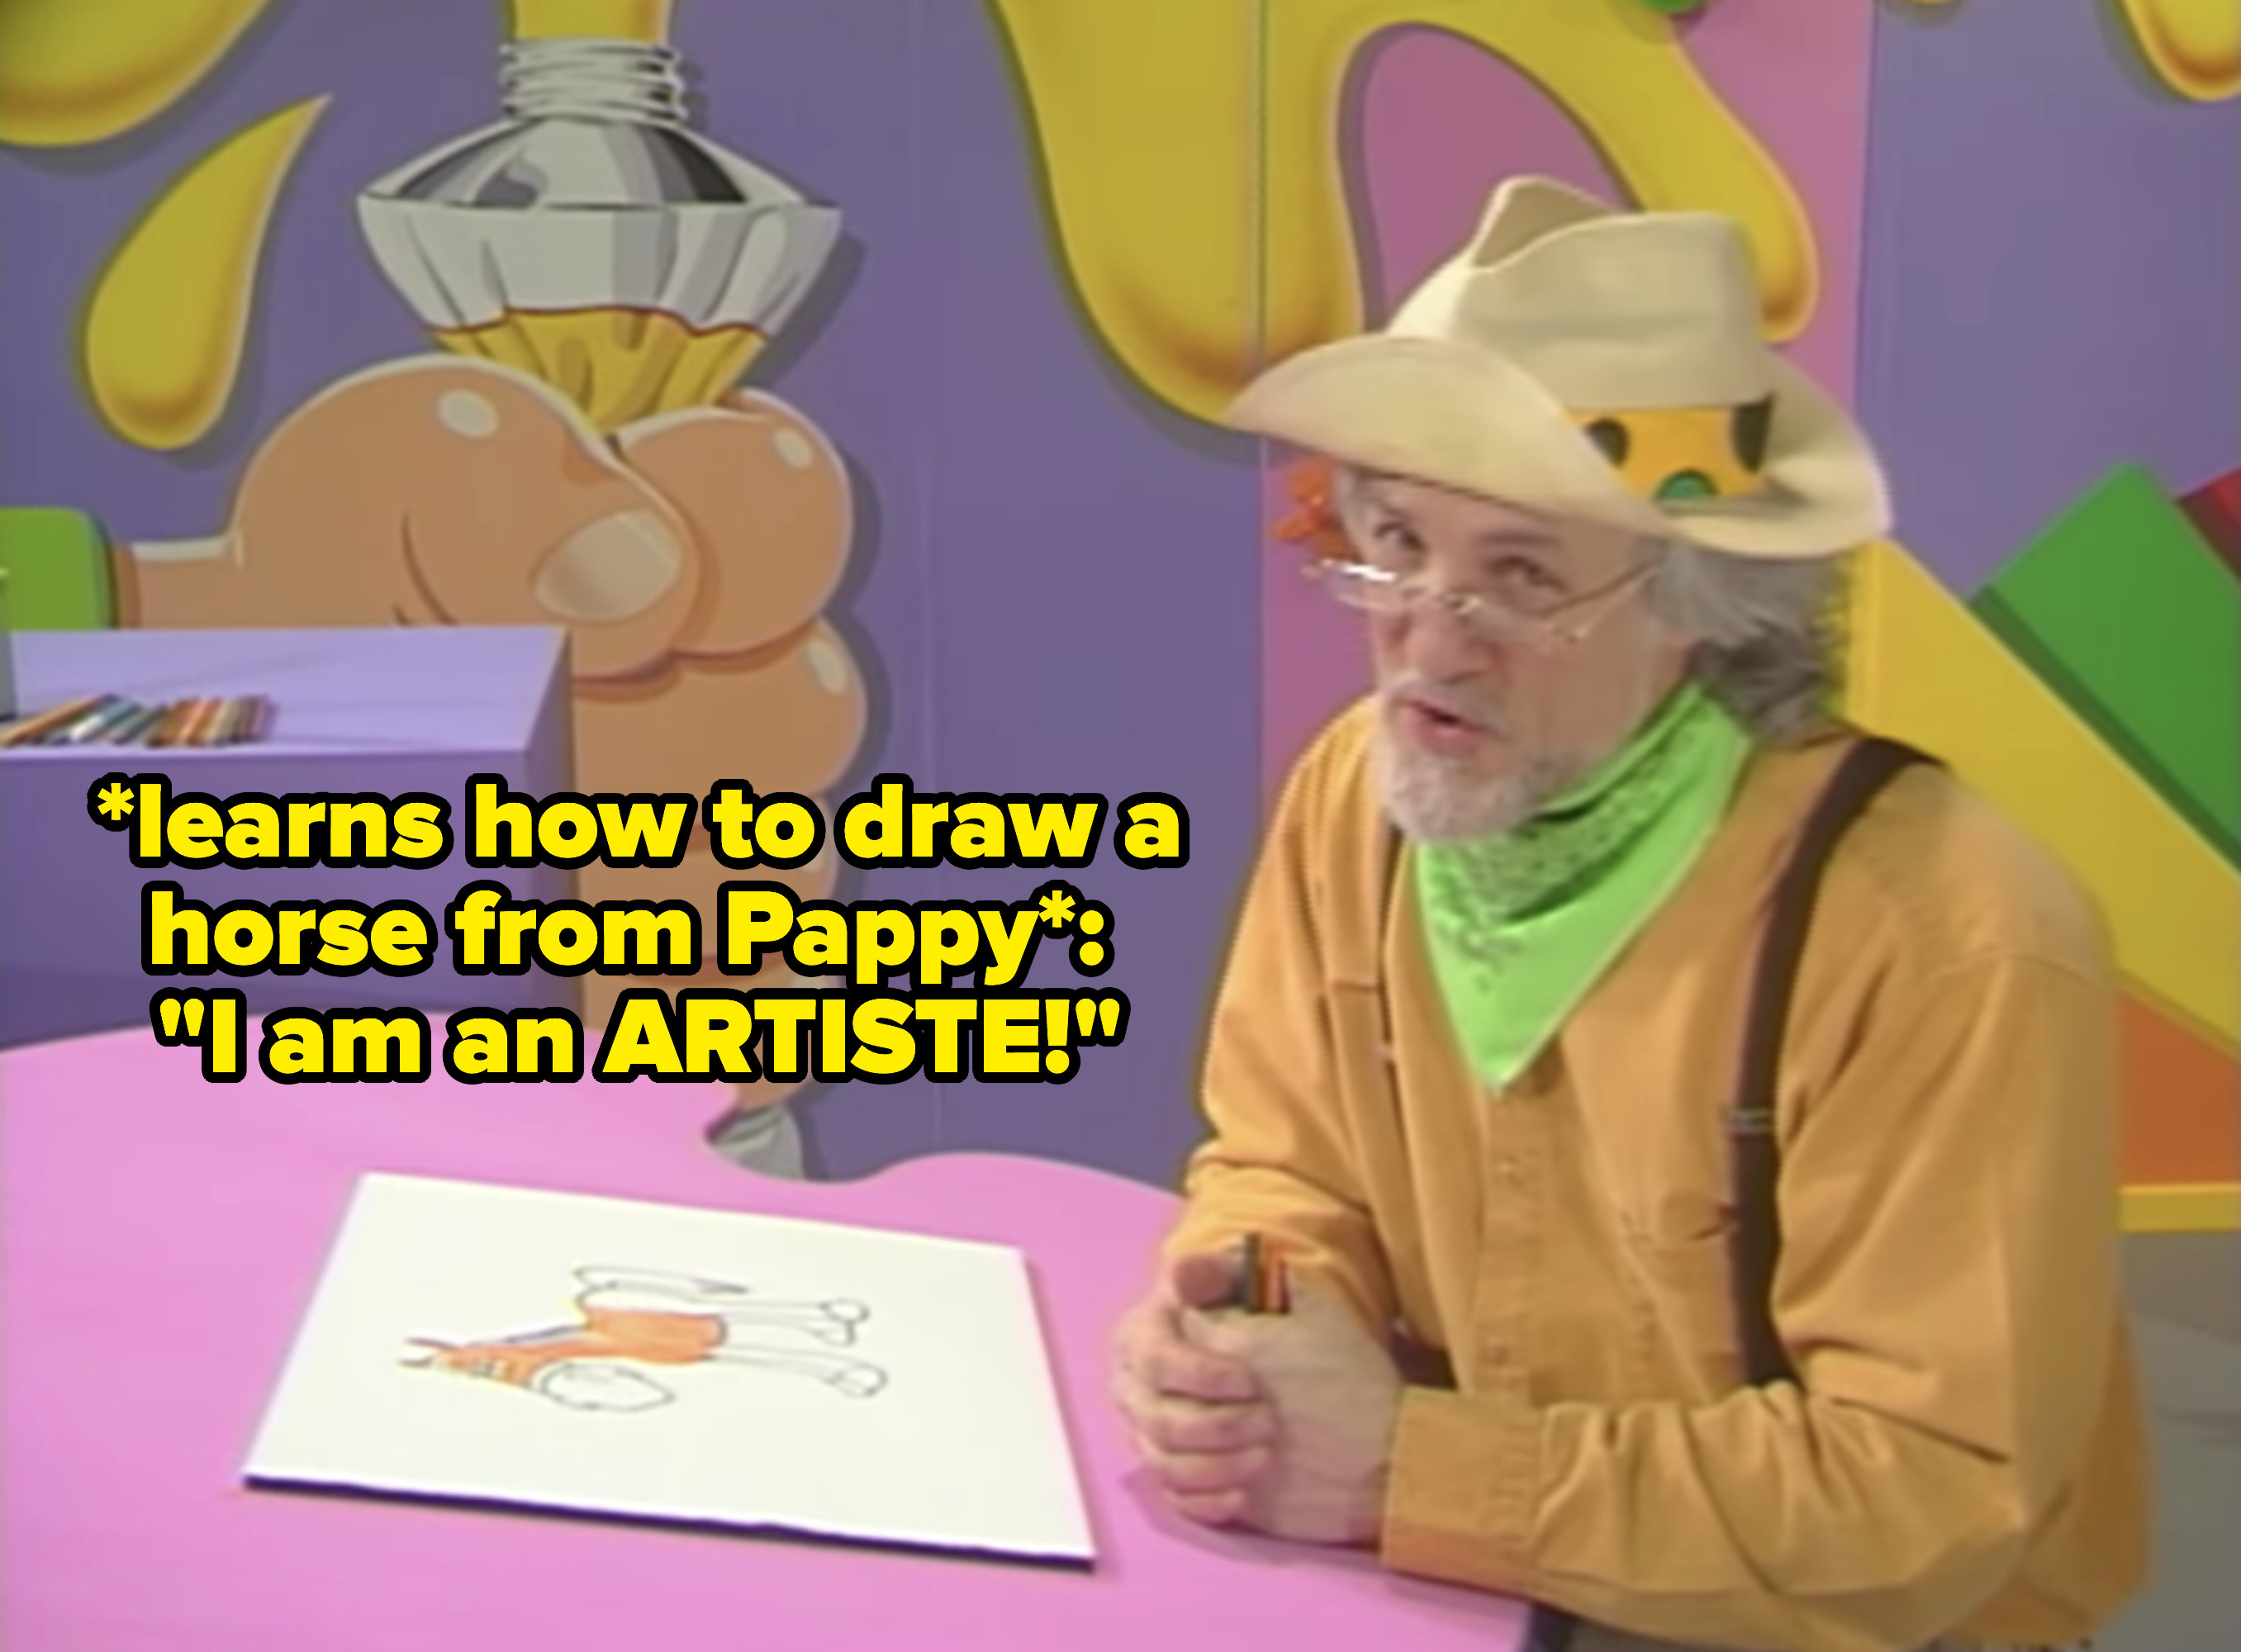 Pappy teaching us how to draw a horse